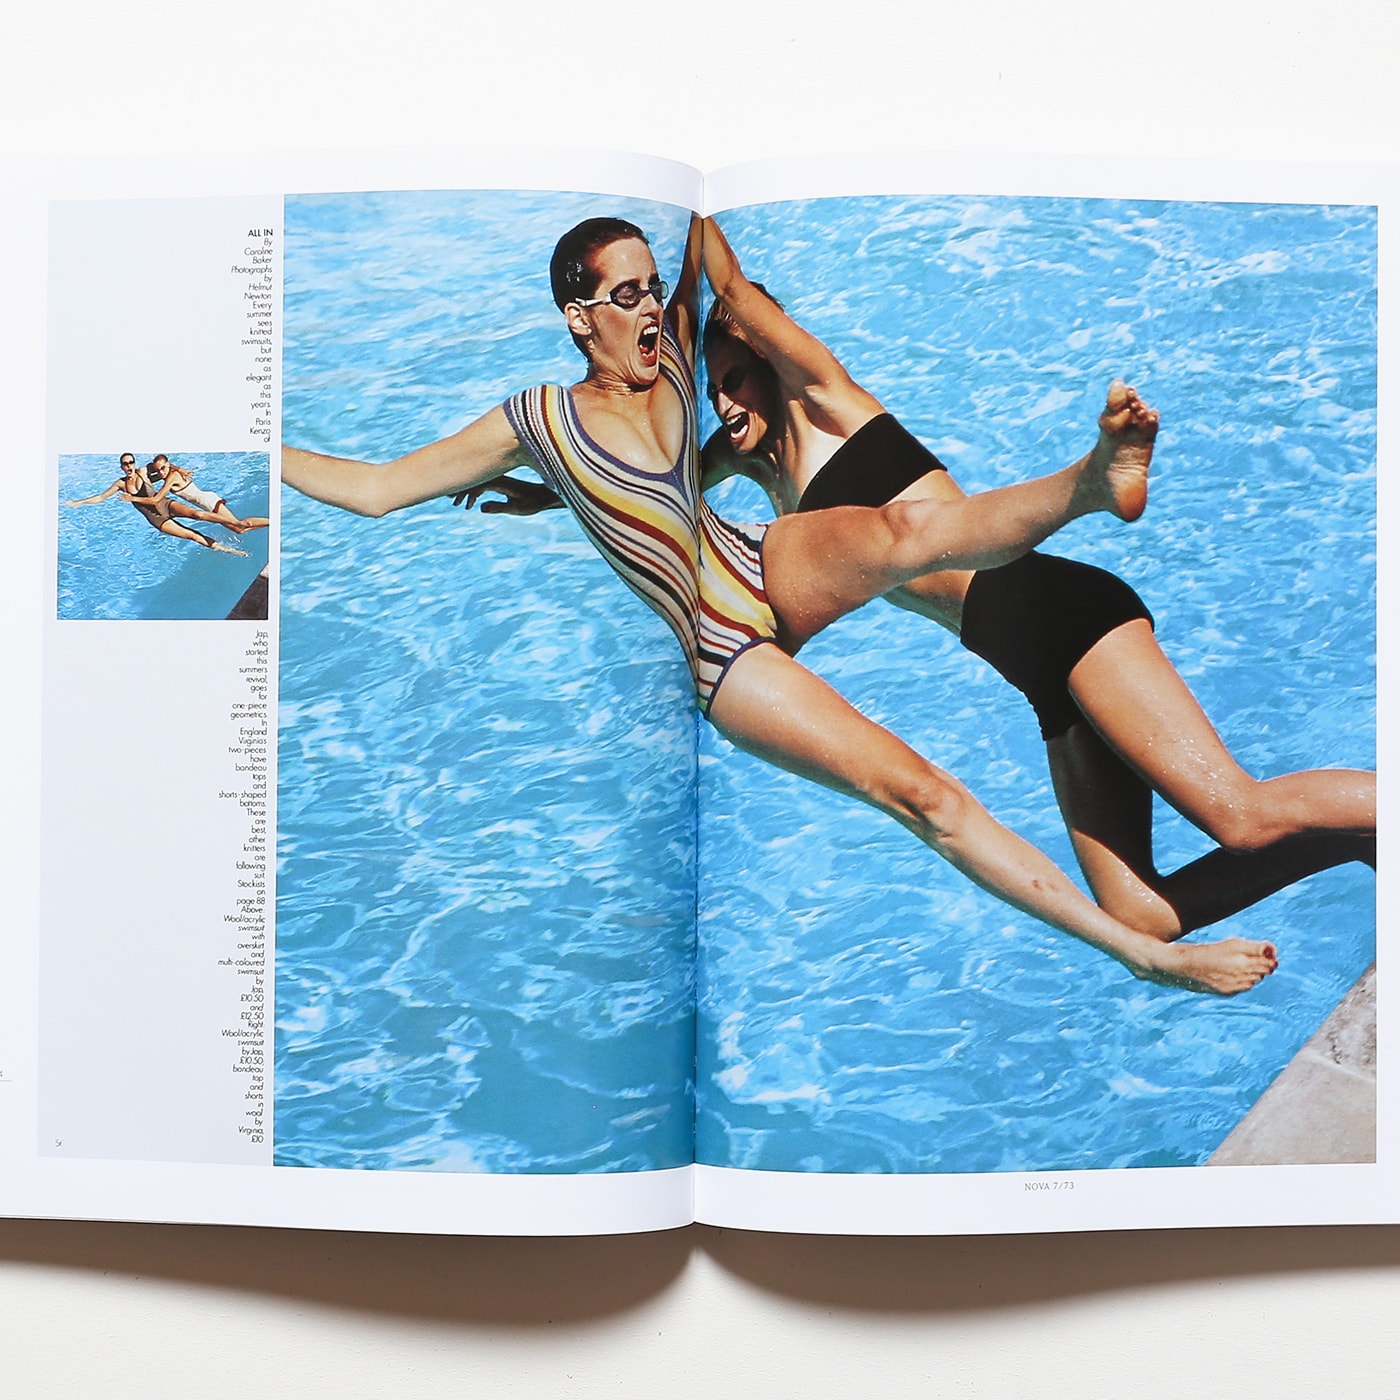 Hemut Newton: Pages from the Glossies